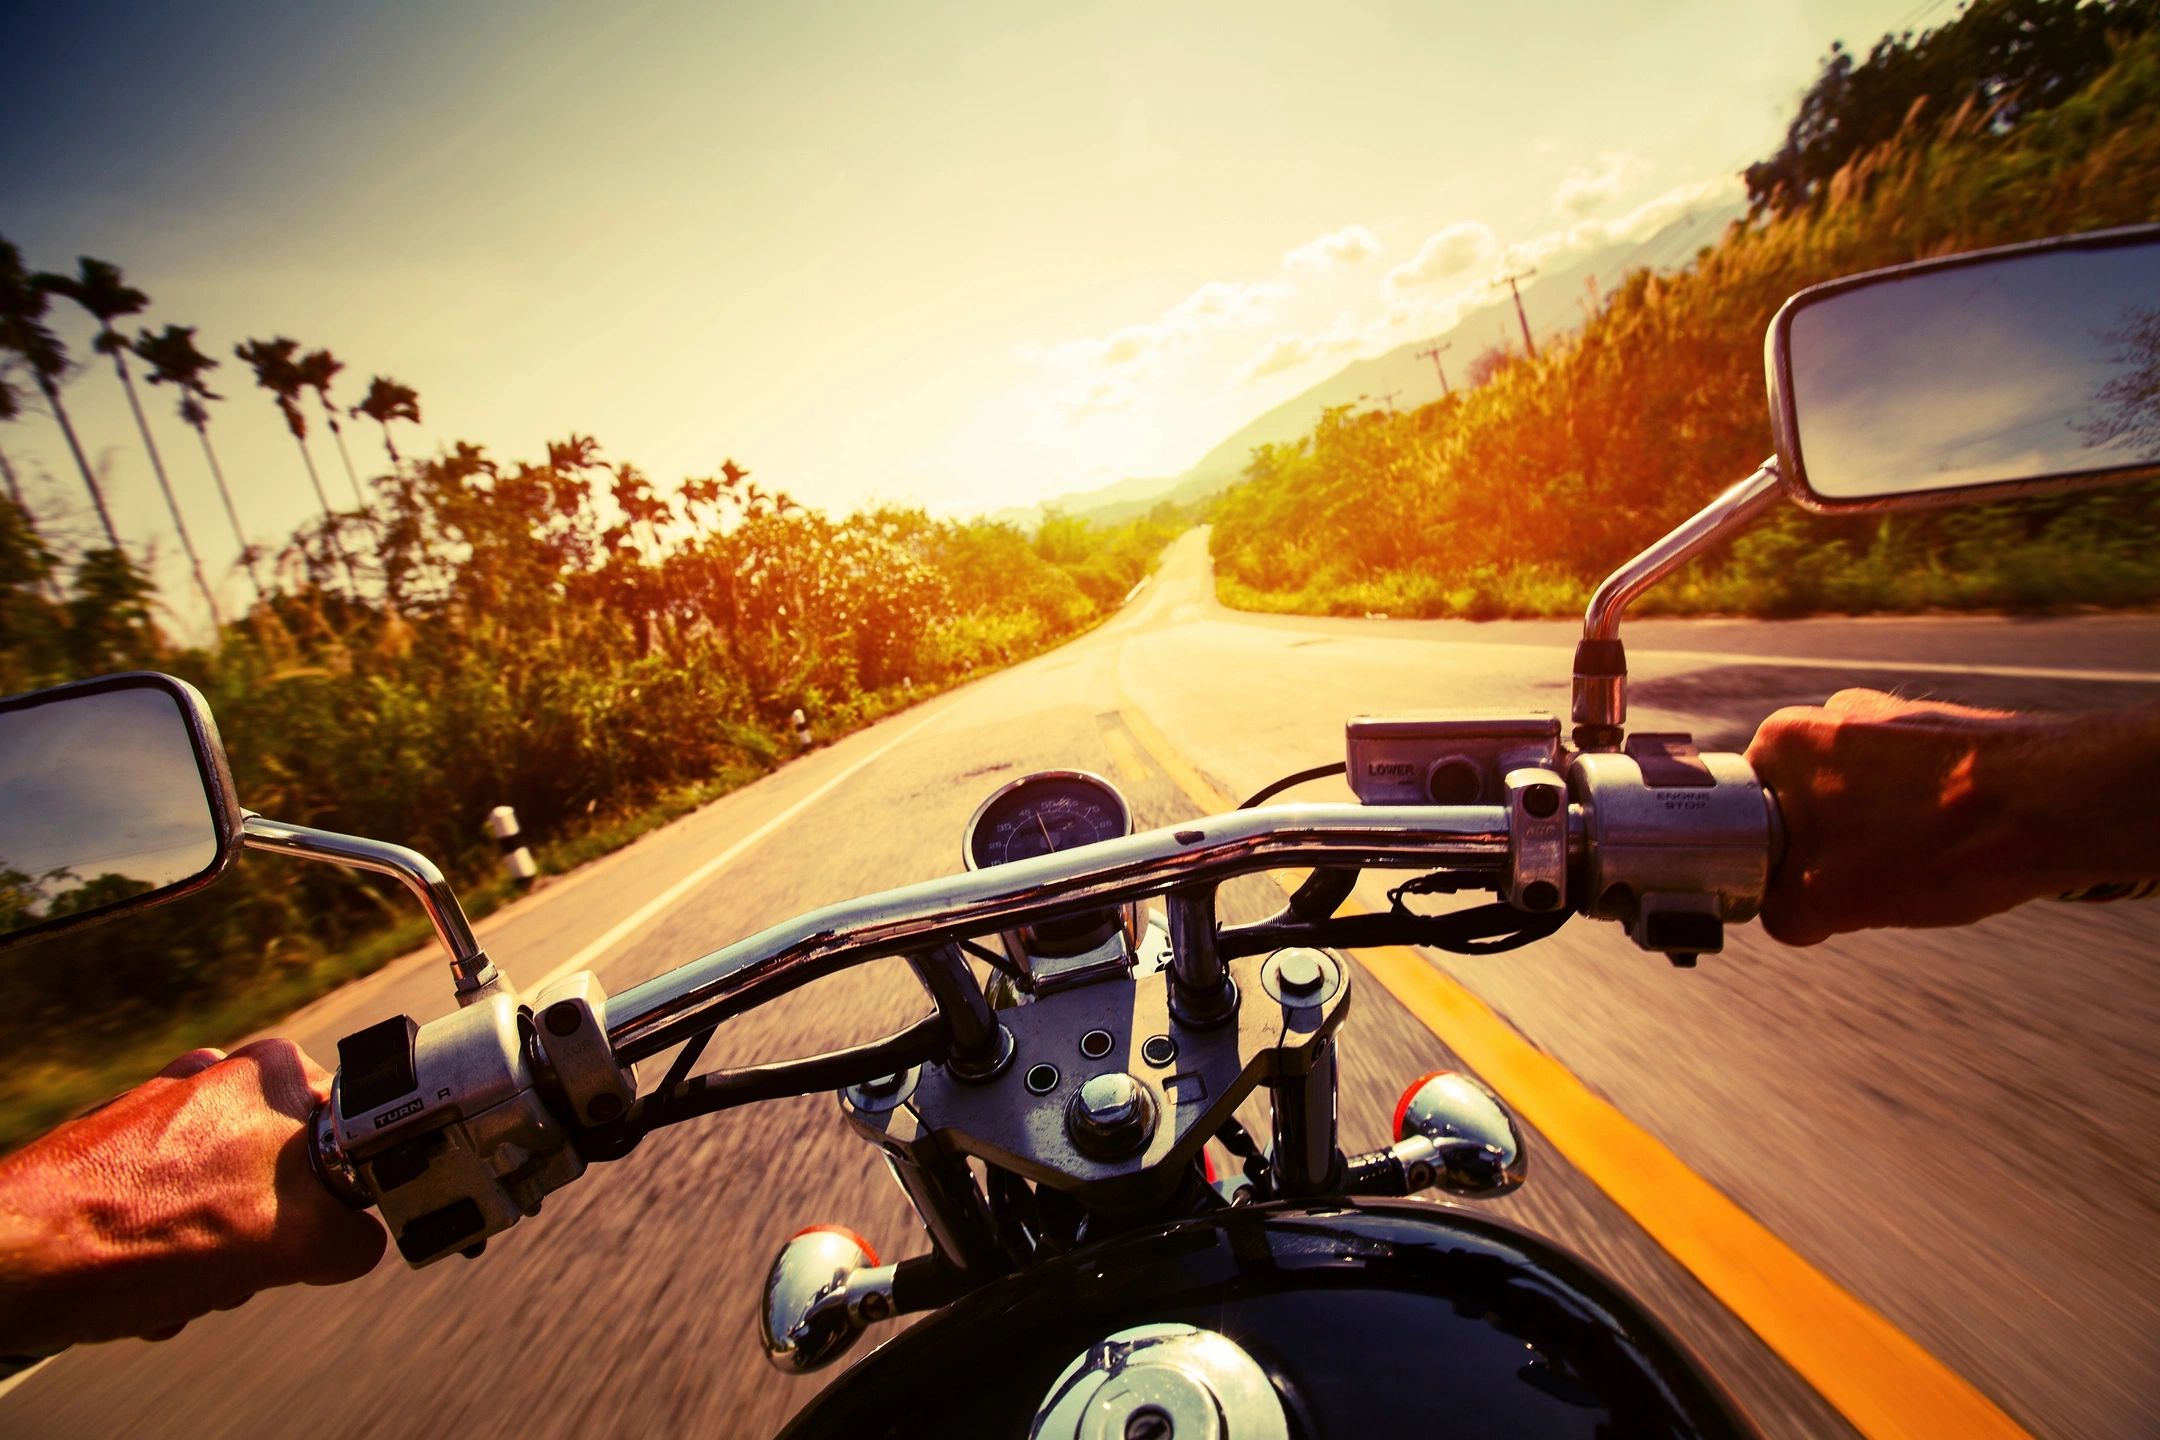 Spring is the Time to Ride! Have fun, Ride Safe!  Motorcycle Accident Prevention